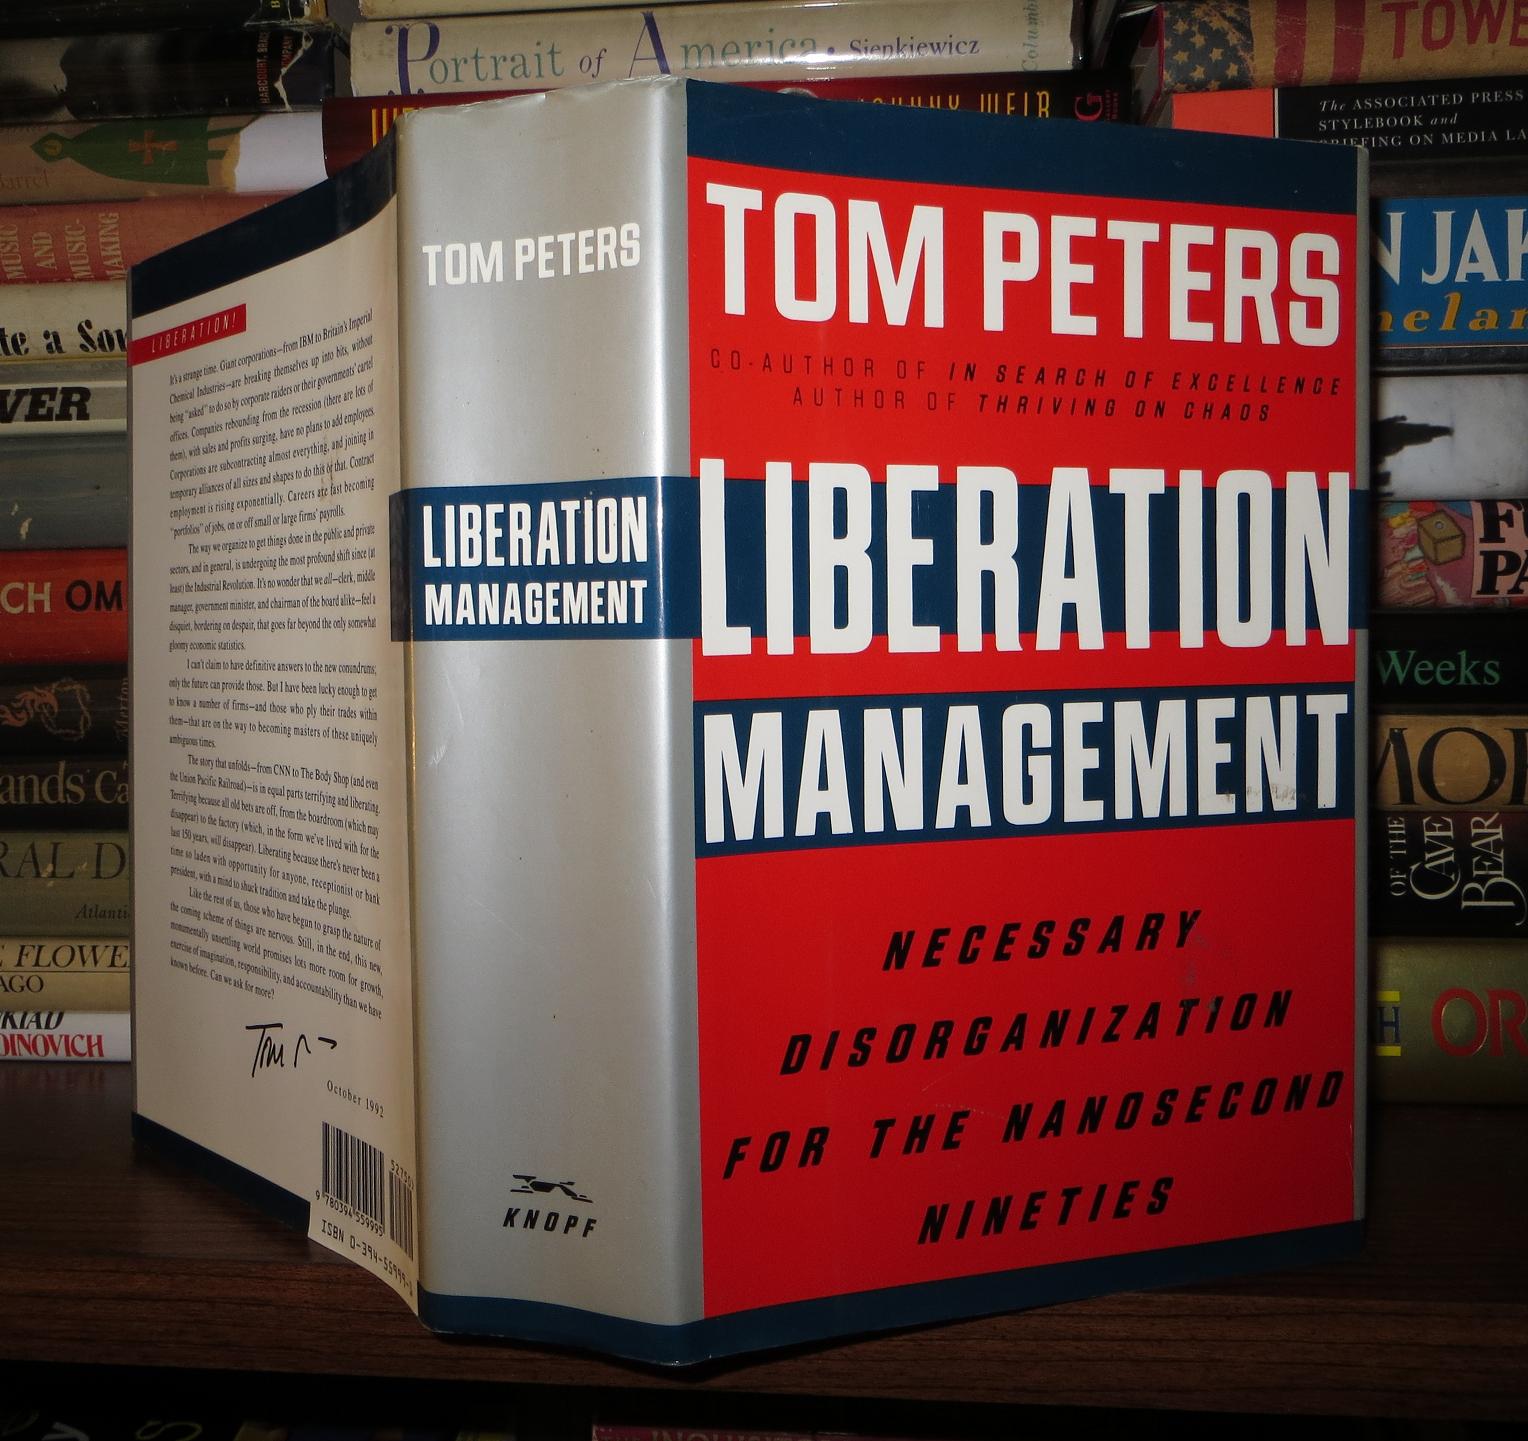 LIBERATION MANAGEMENT Necessary Disorganization for the Nanosecond Nineties  by Tom Peters on Rare Book Cellar